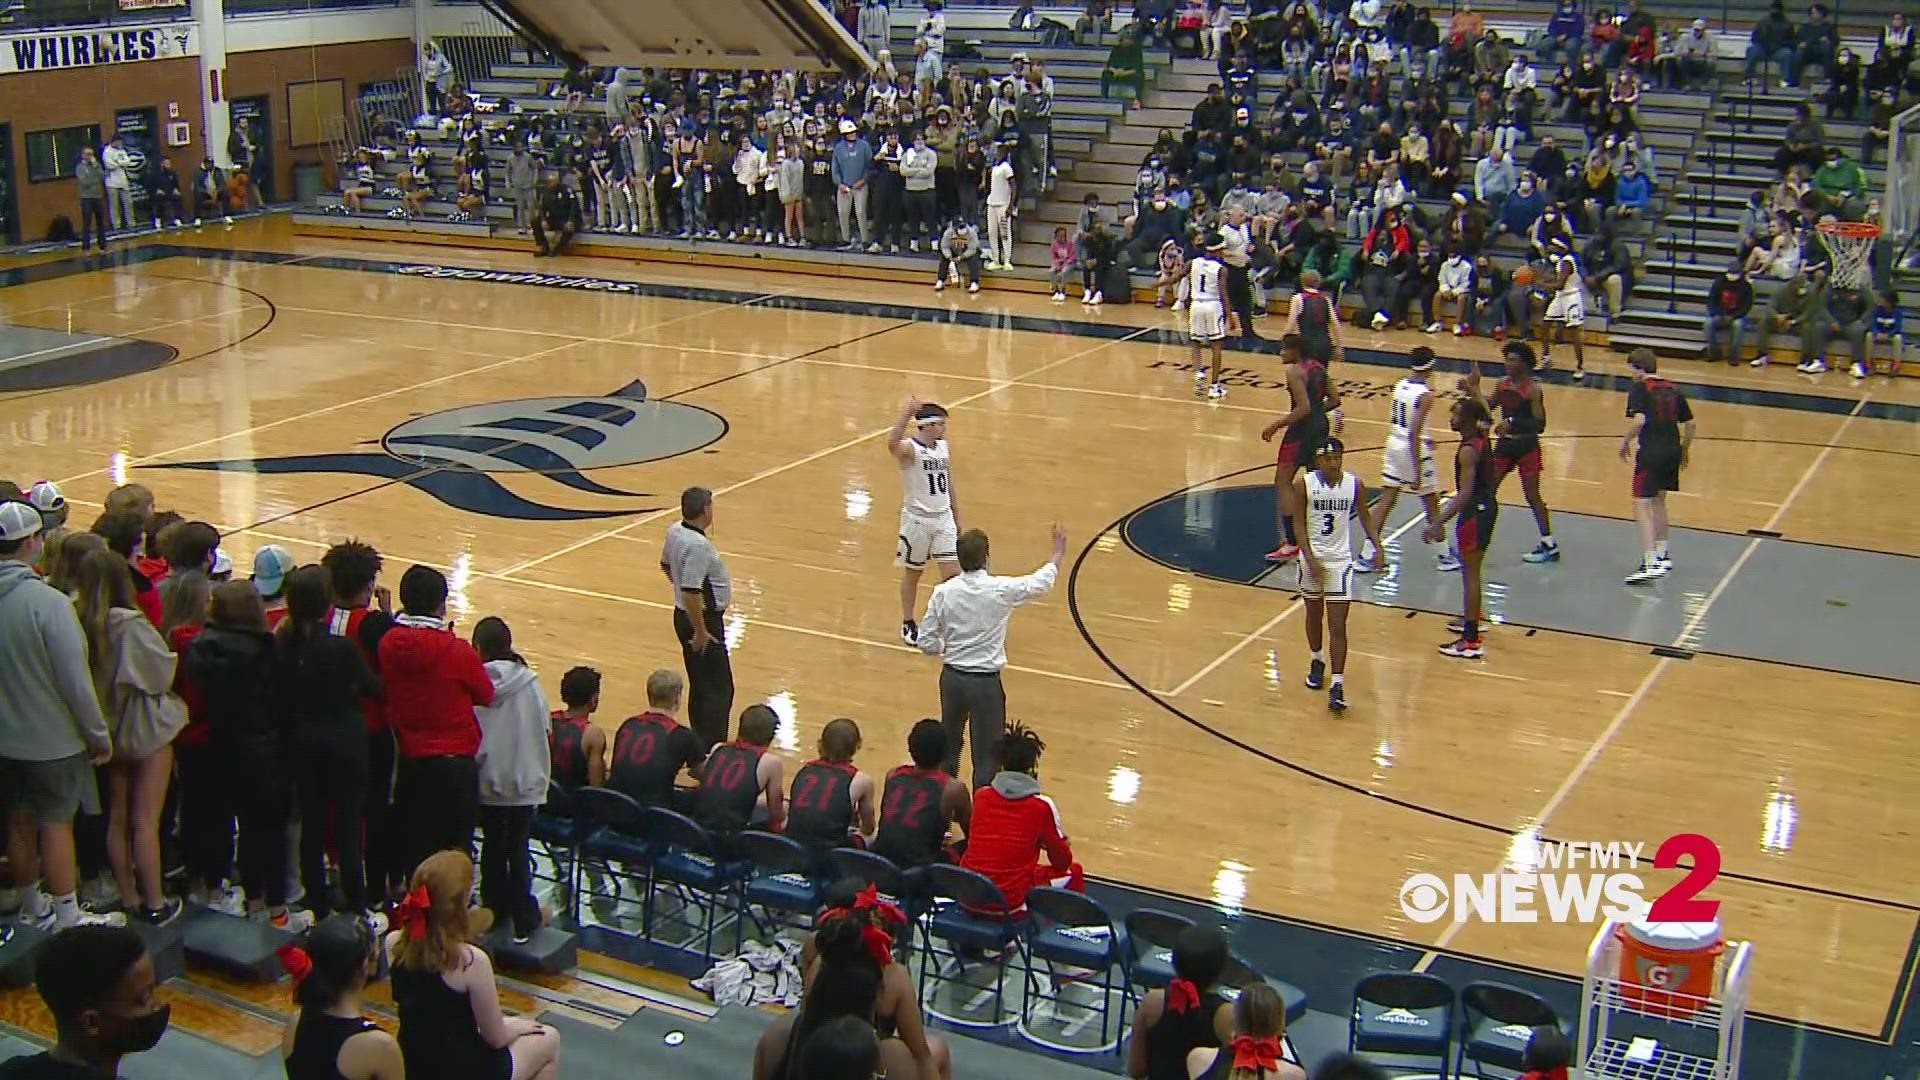 Grimsley wins 57-43 and moves to 13-1 on the season